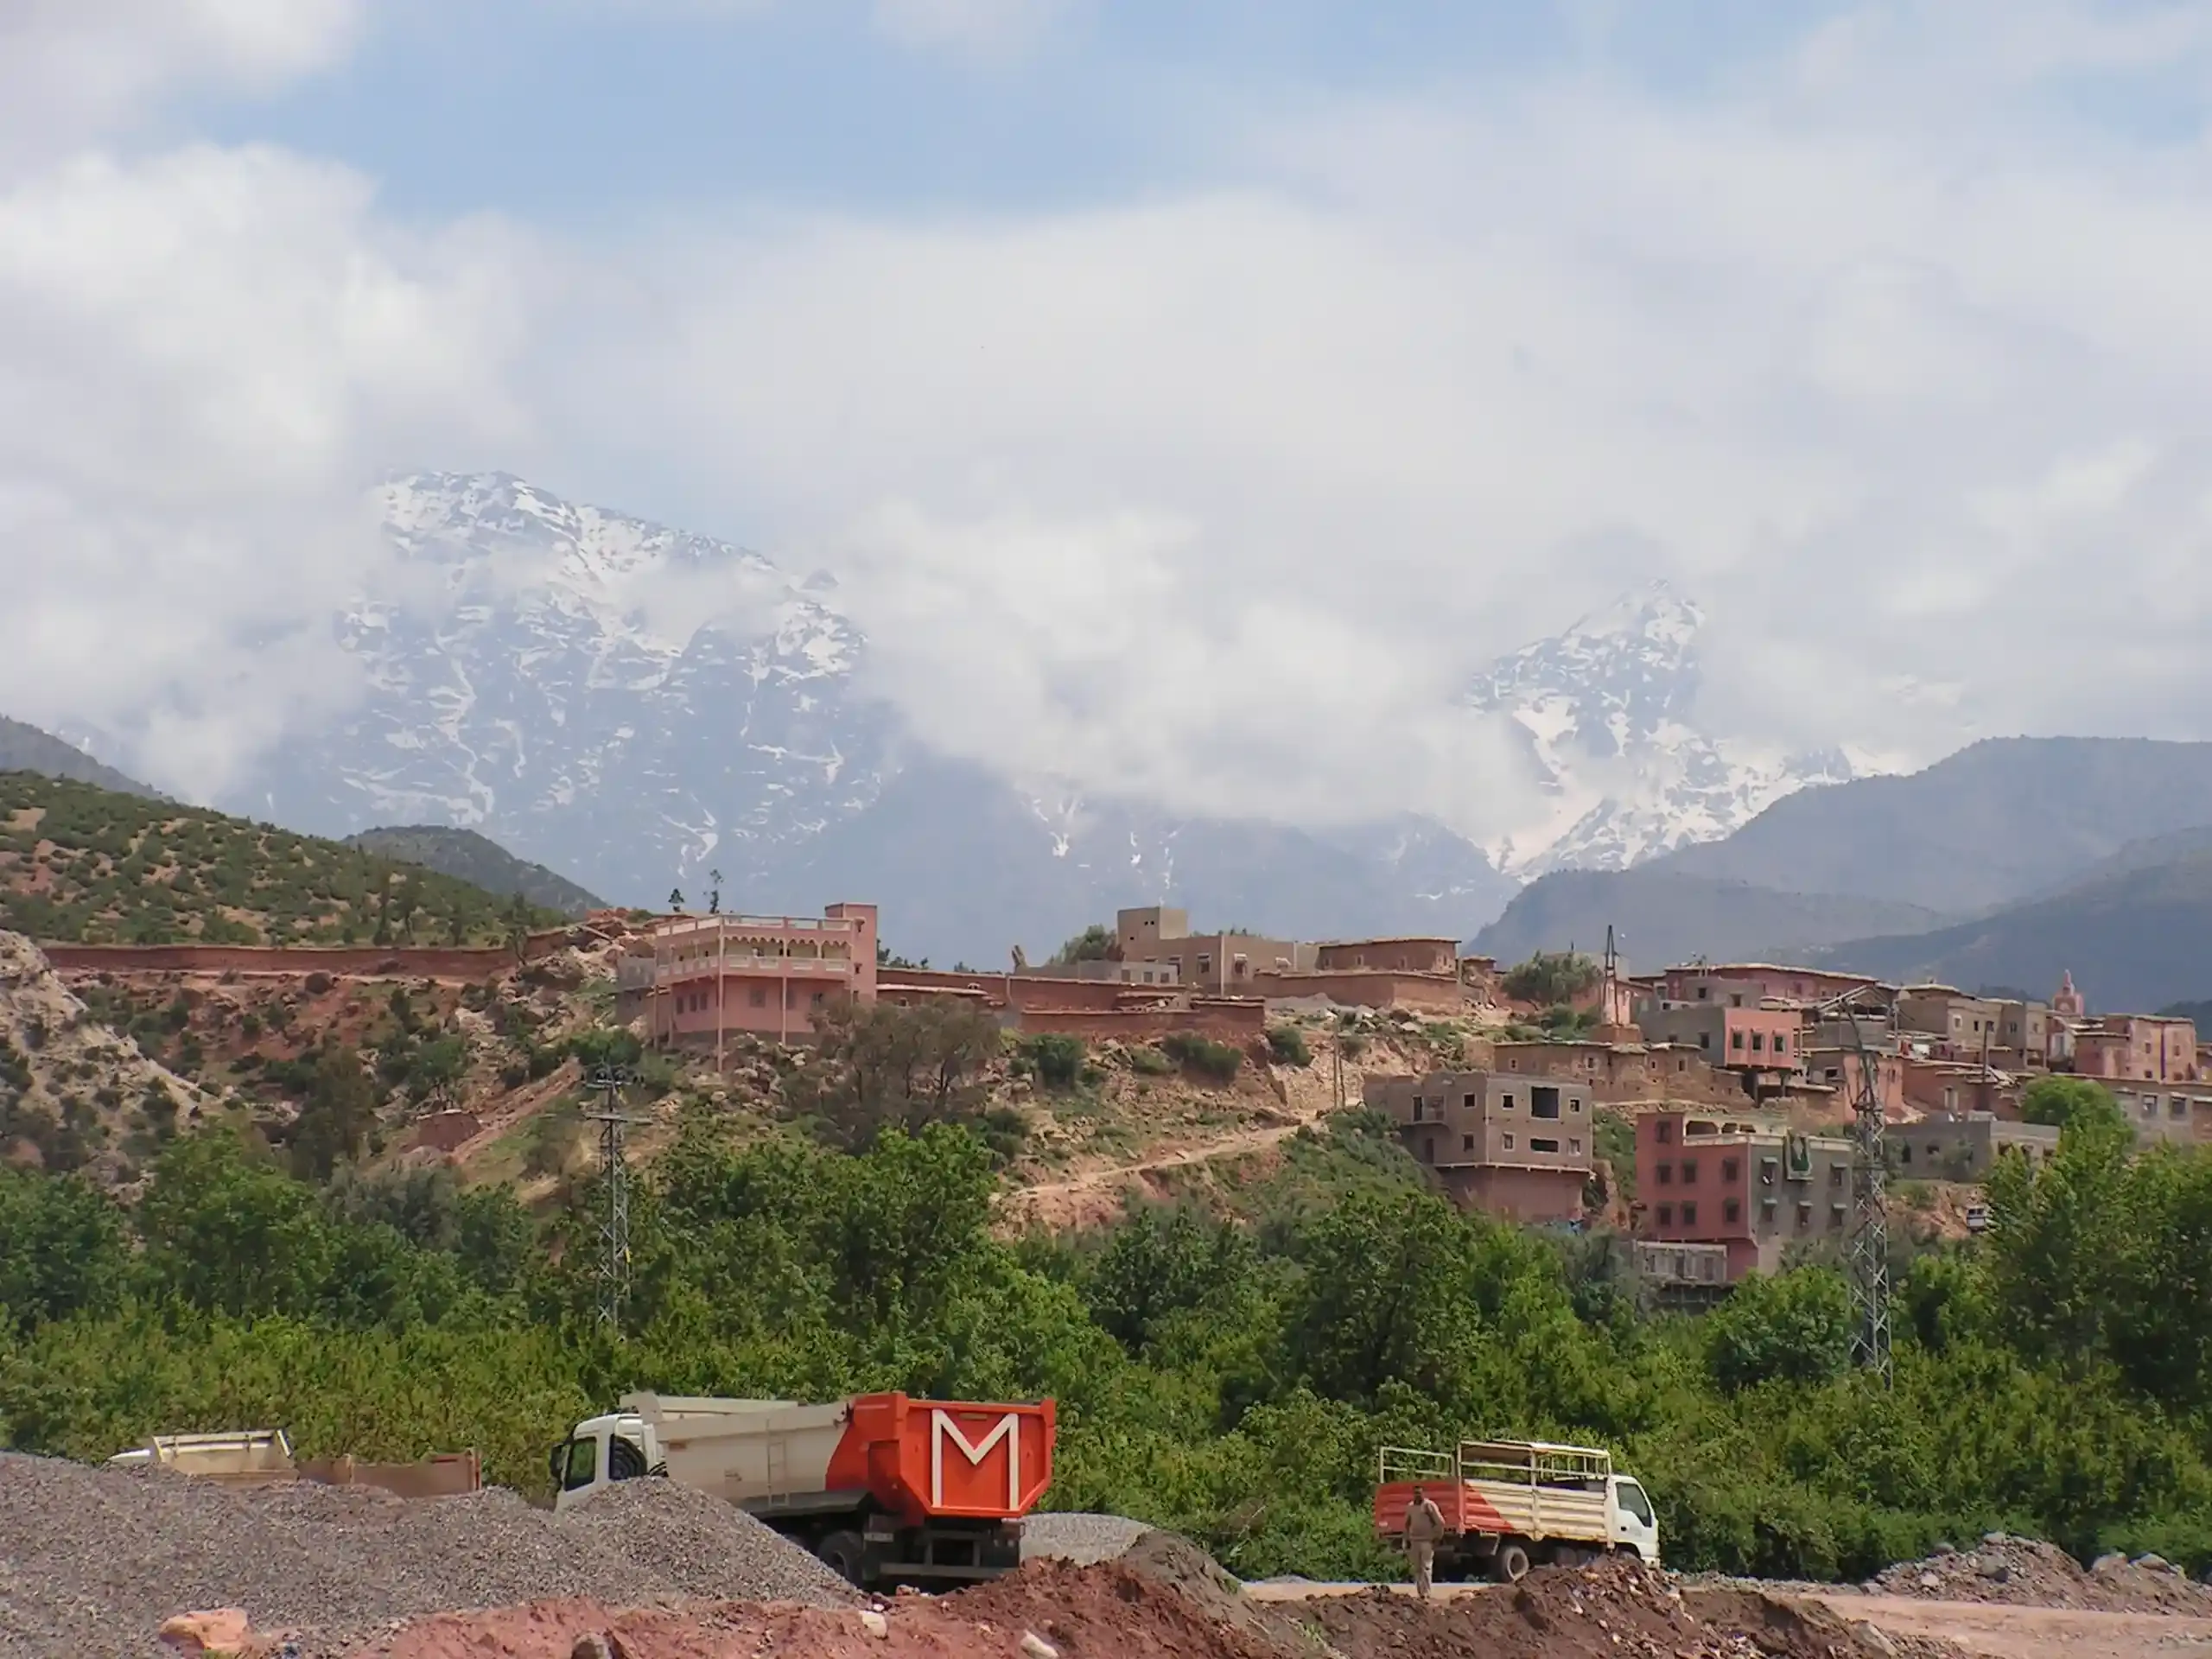 The Atlas Mountains, an essential destination you can enjoy during your stay at Riad Houdou, our guesthouse in Marrakech.